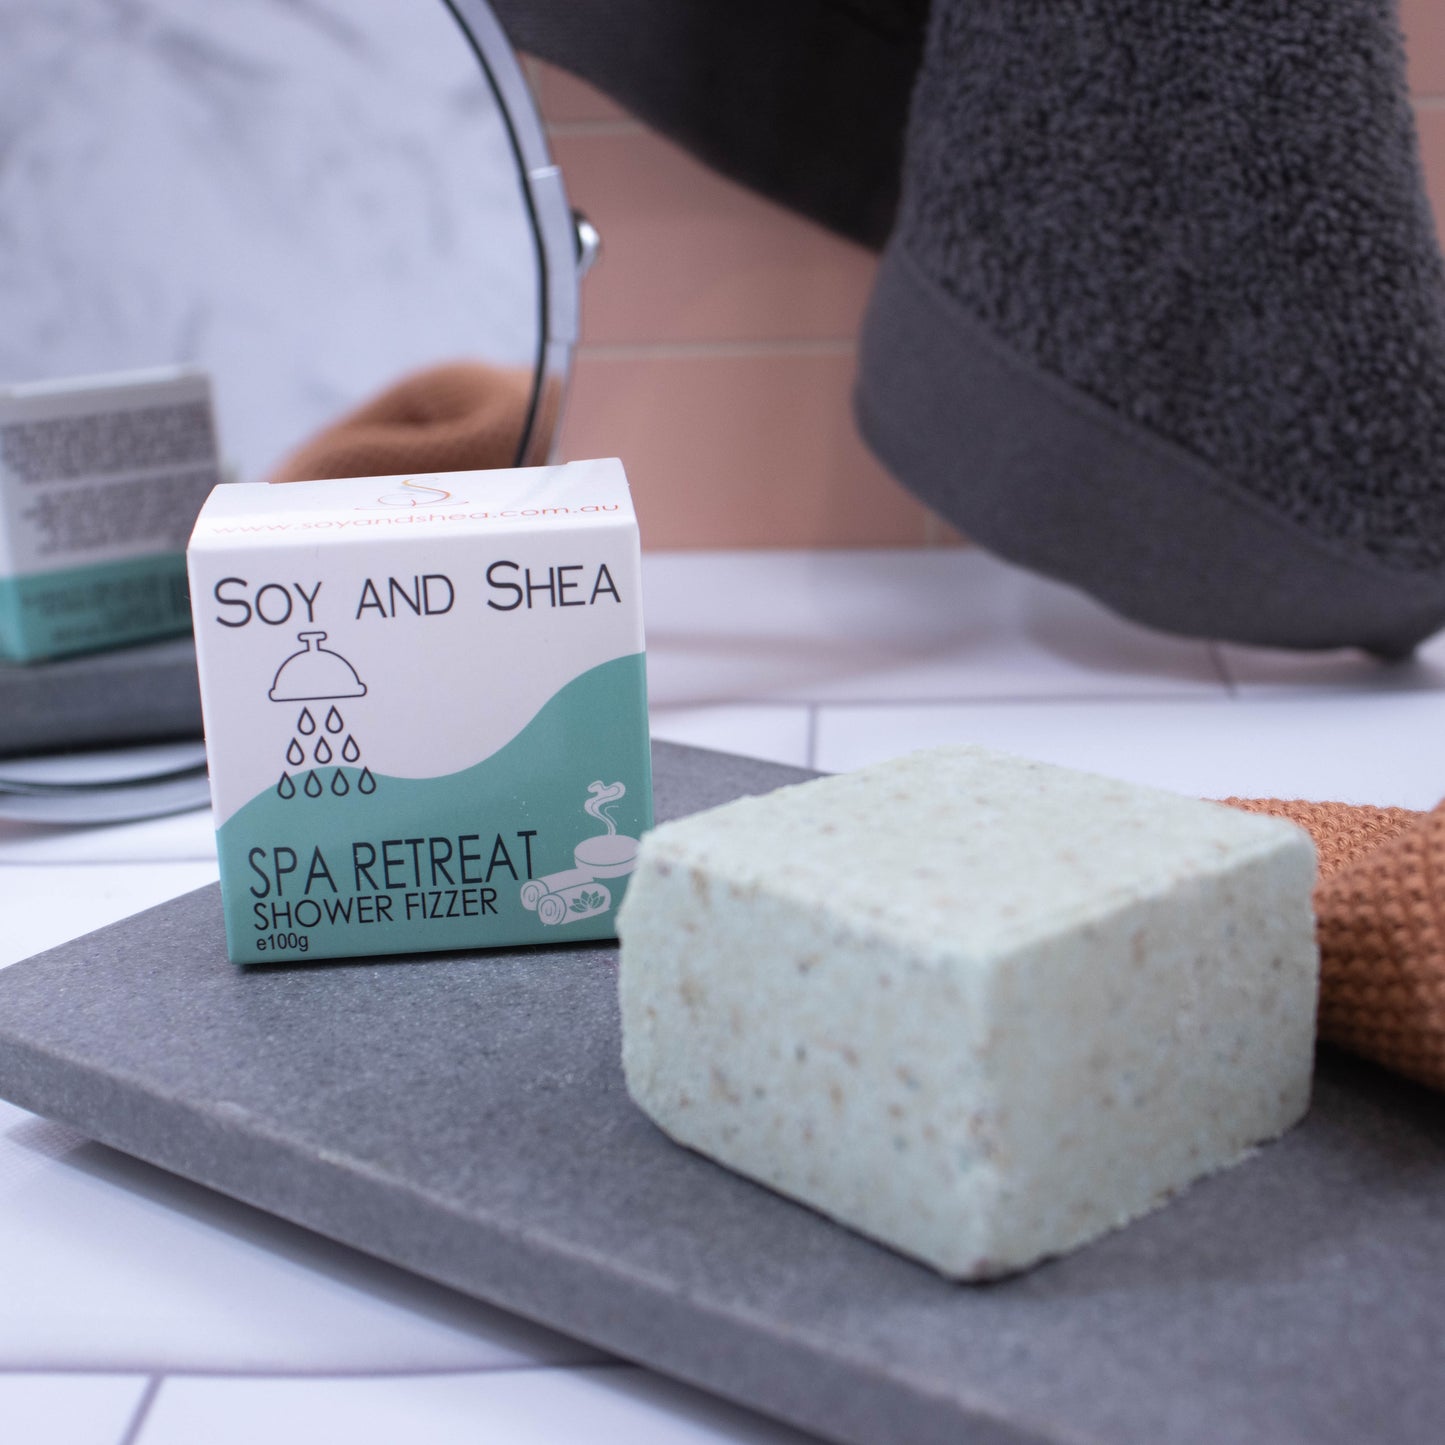 A light green cube with brown speckles sits on a stone slab with a box of the product behind it. The box is white with a sea green wave and shows details of the product. In the background is a mirror reflecting the back of the box which has additional writing.  Hanging against the pink tile background is a grey towel